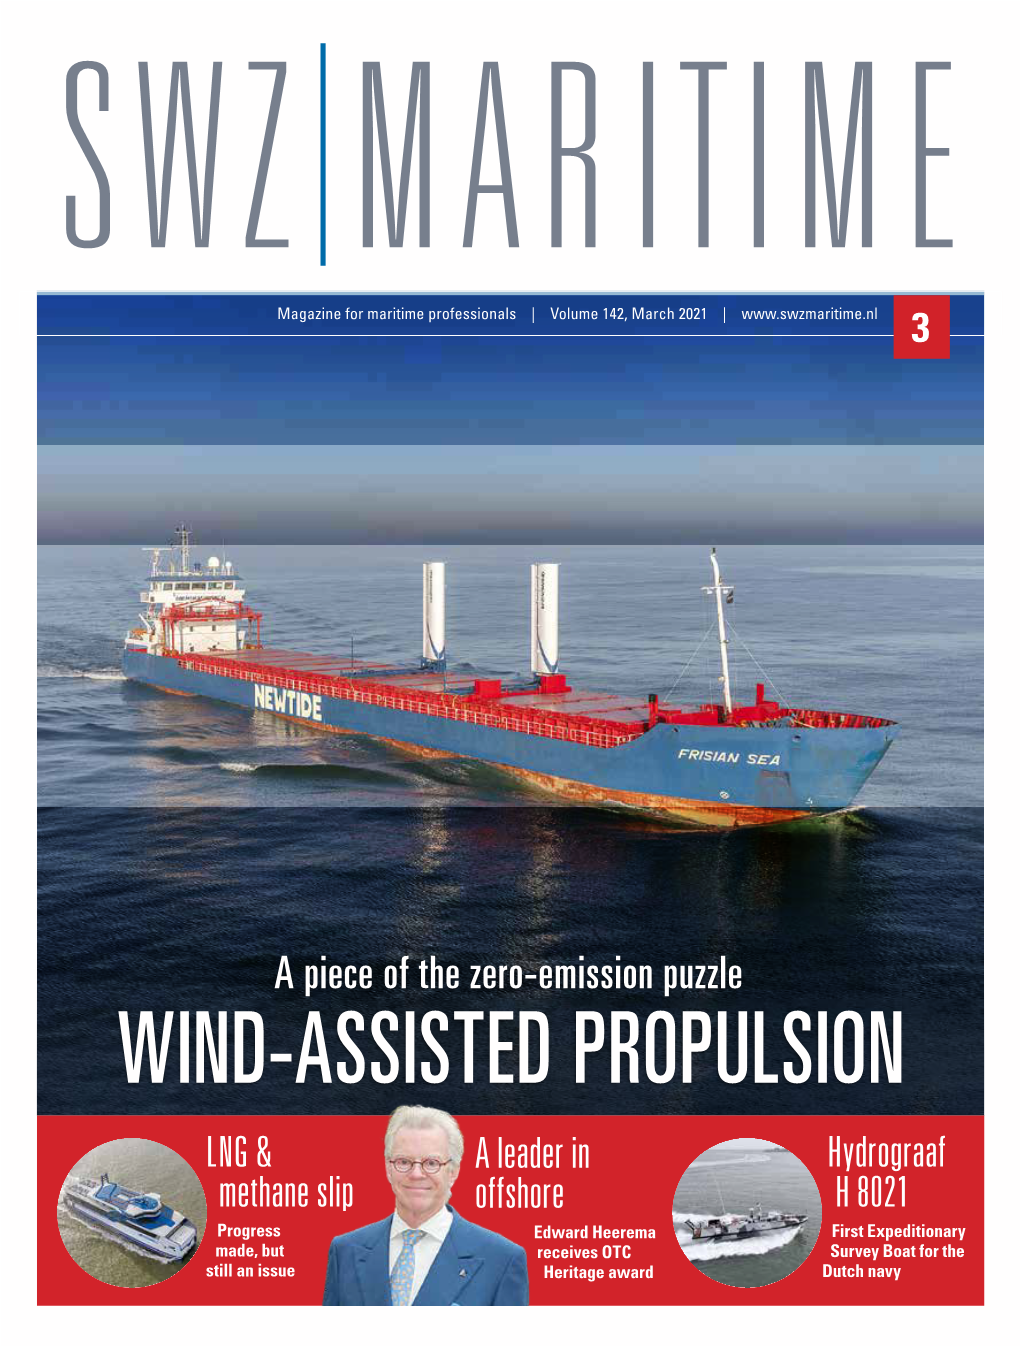 Wind-Assisted Propulsion